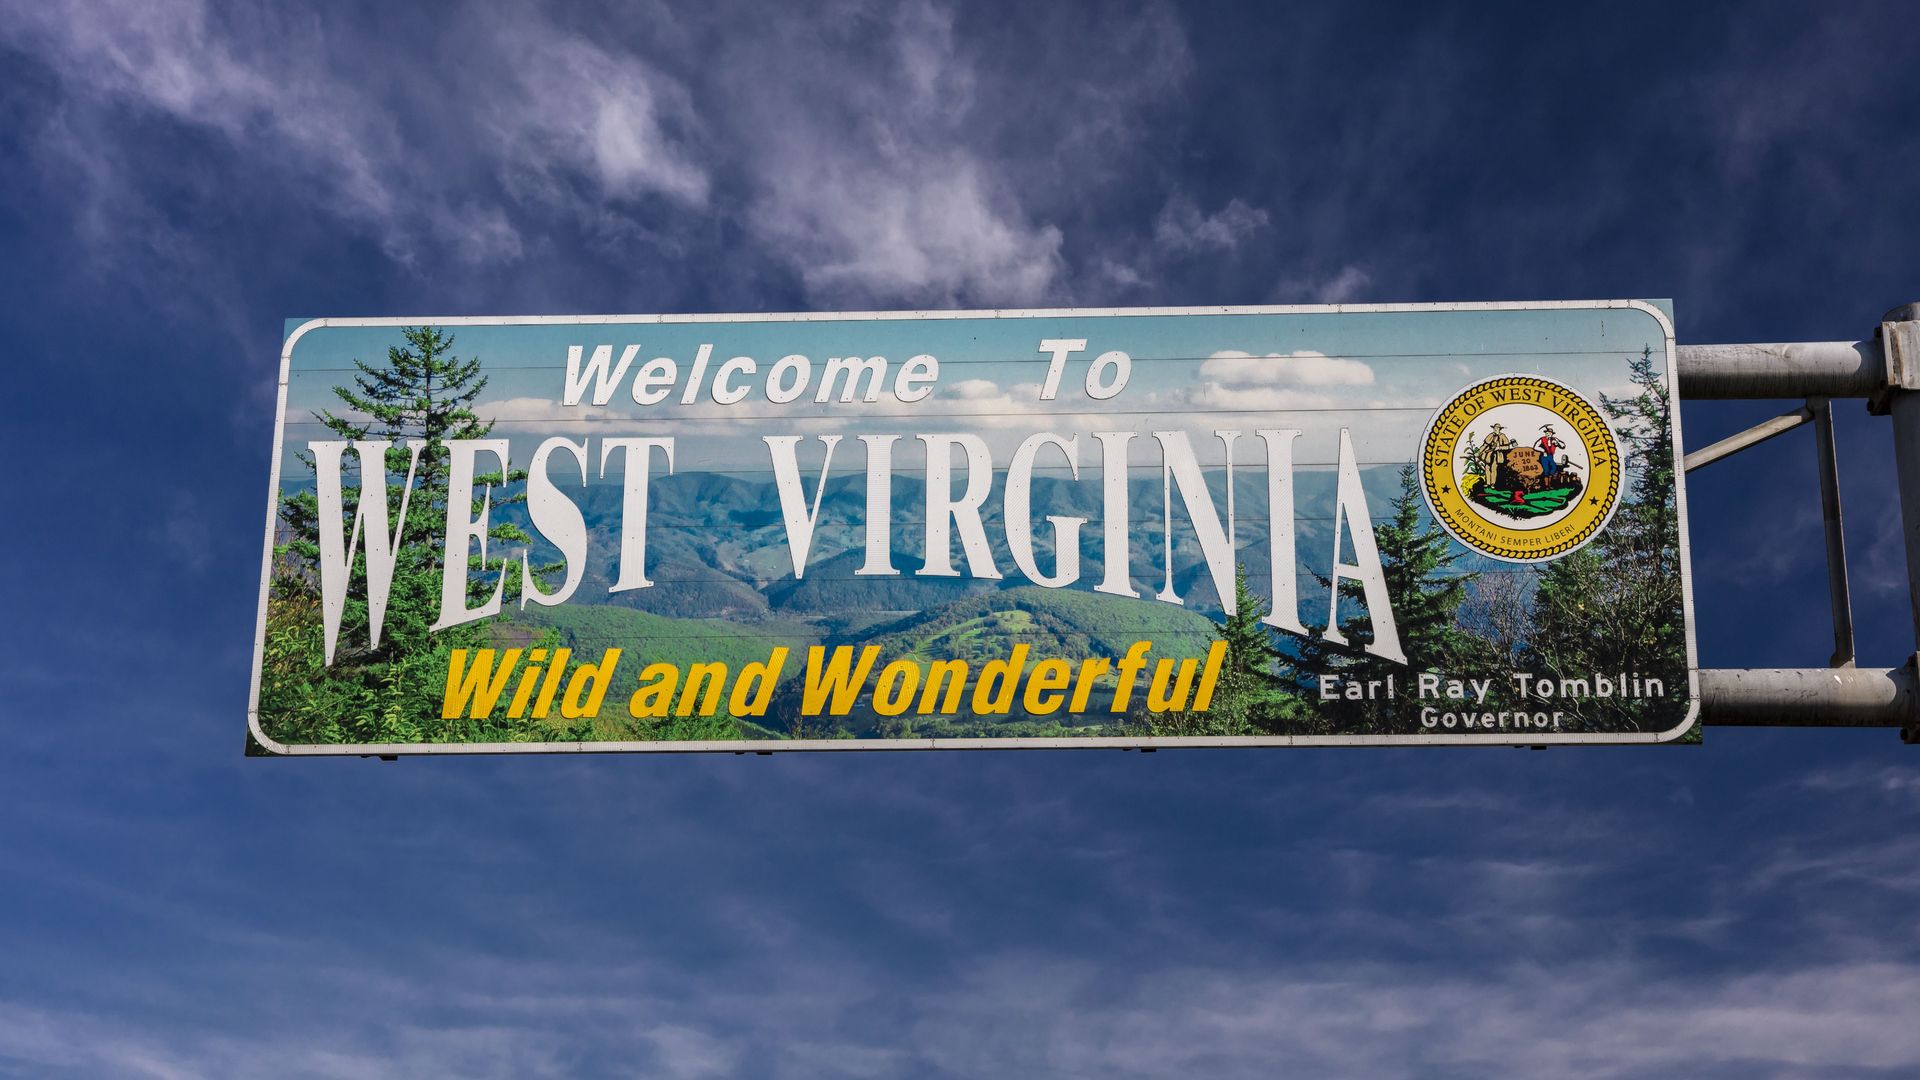 A "Welcome to West Virginia" sign.